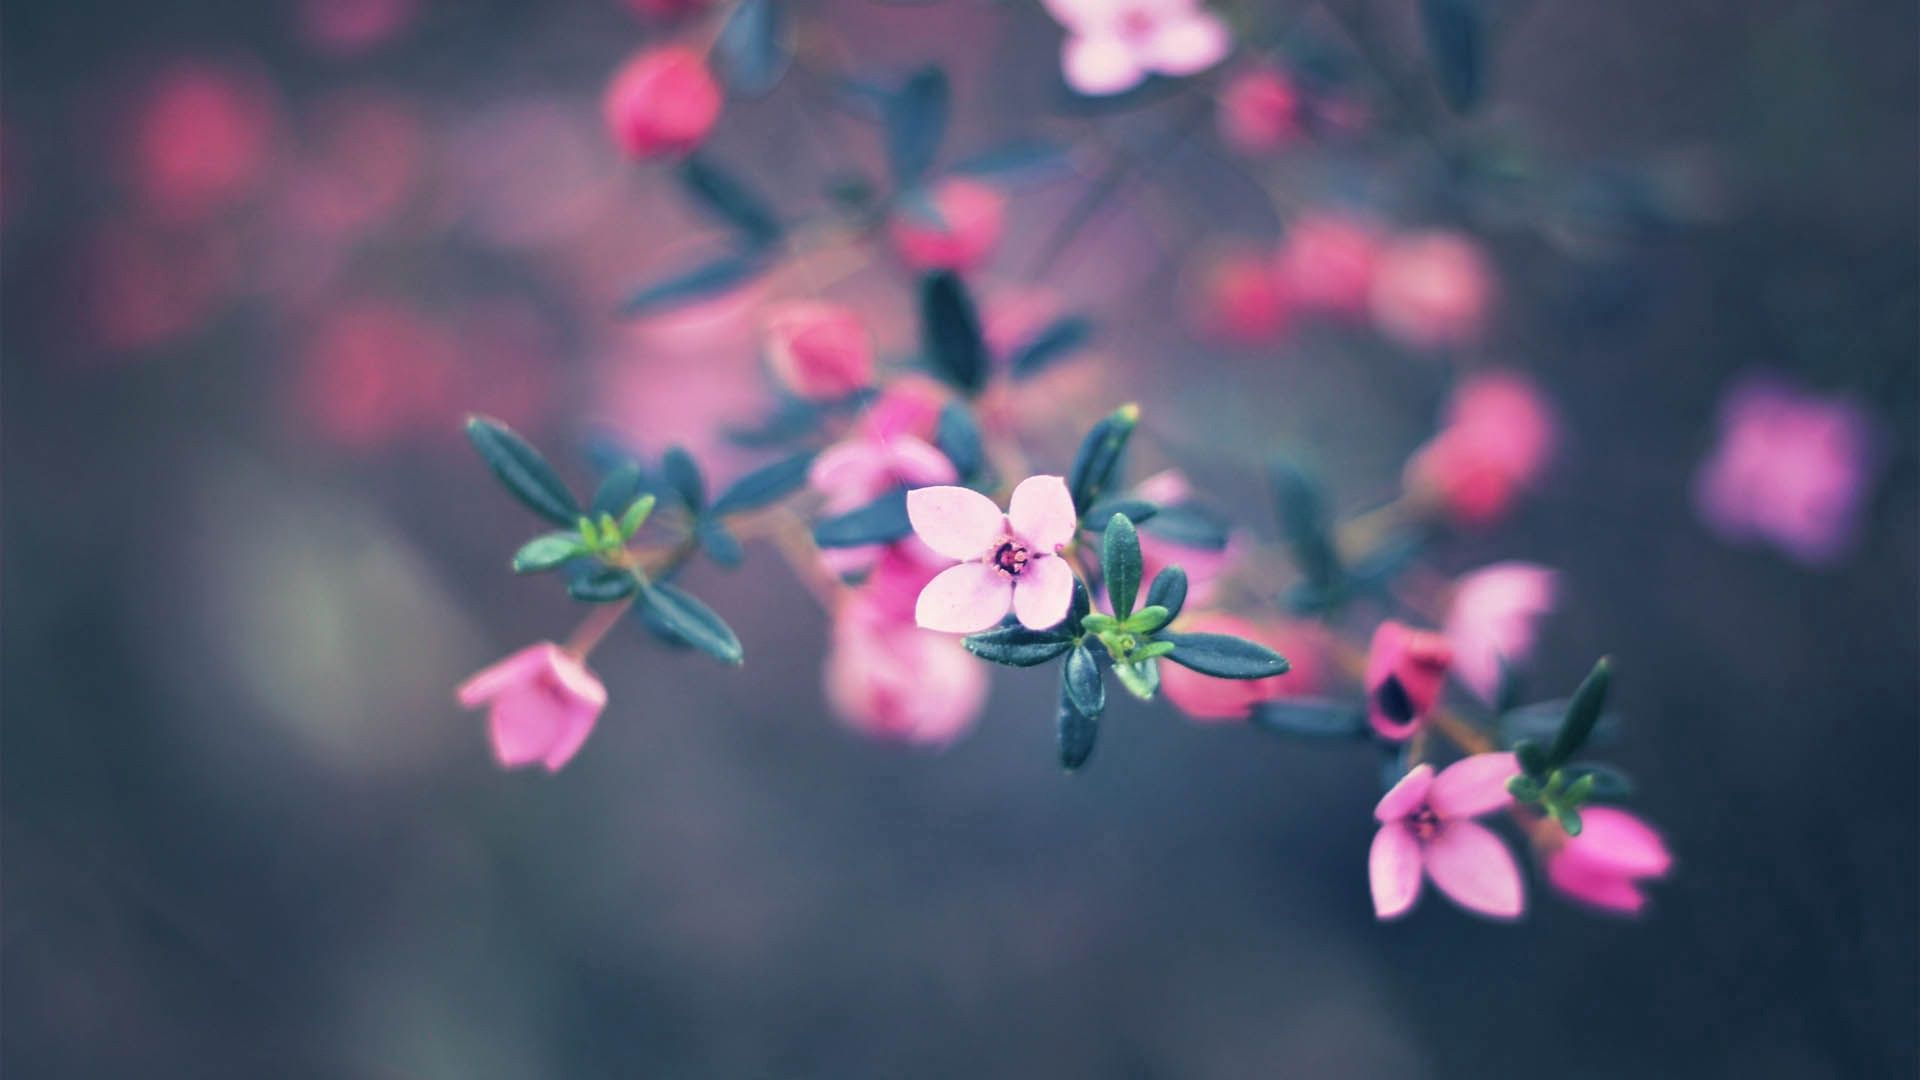 Download wallpaper pink flowers, buds, the dark background, bokeh, macro photography, spring, summer, flora, free desktop wallpaper in the resolution 1920x1080 - picture no. 43009 - YouTube